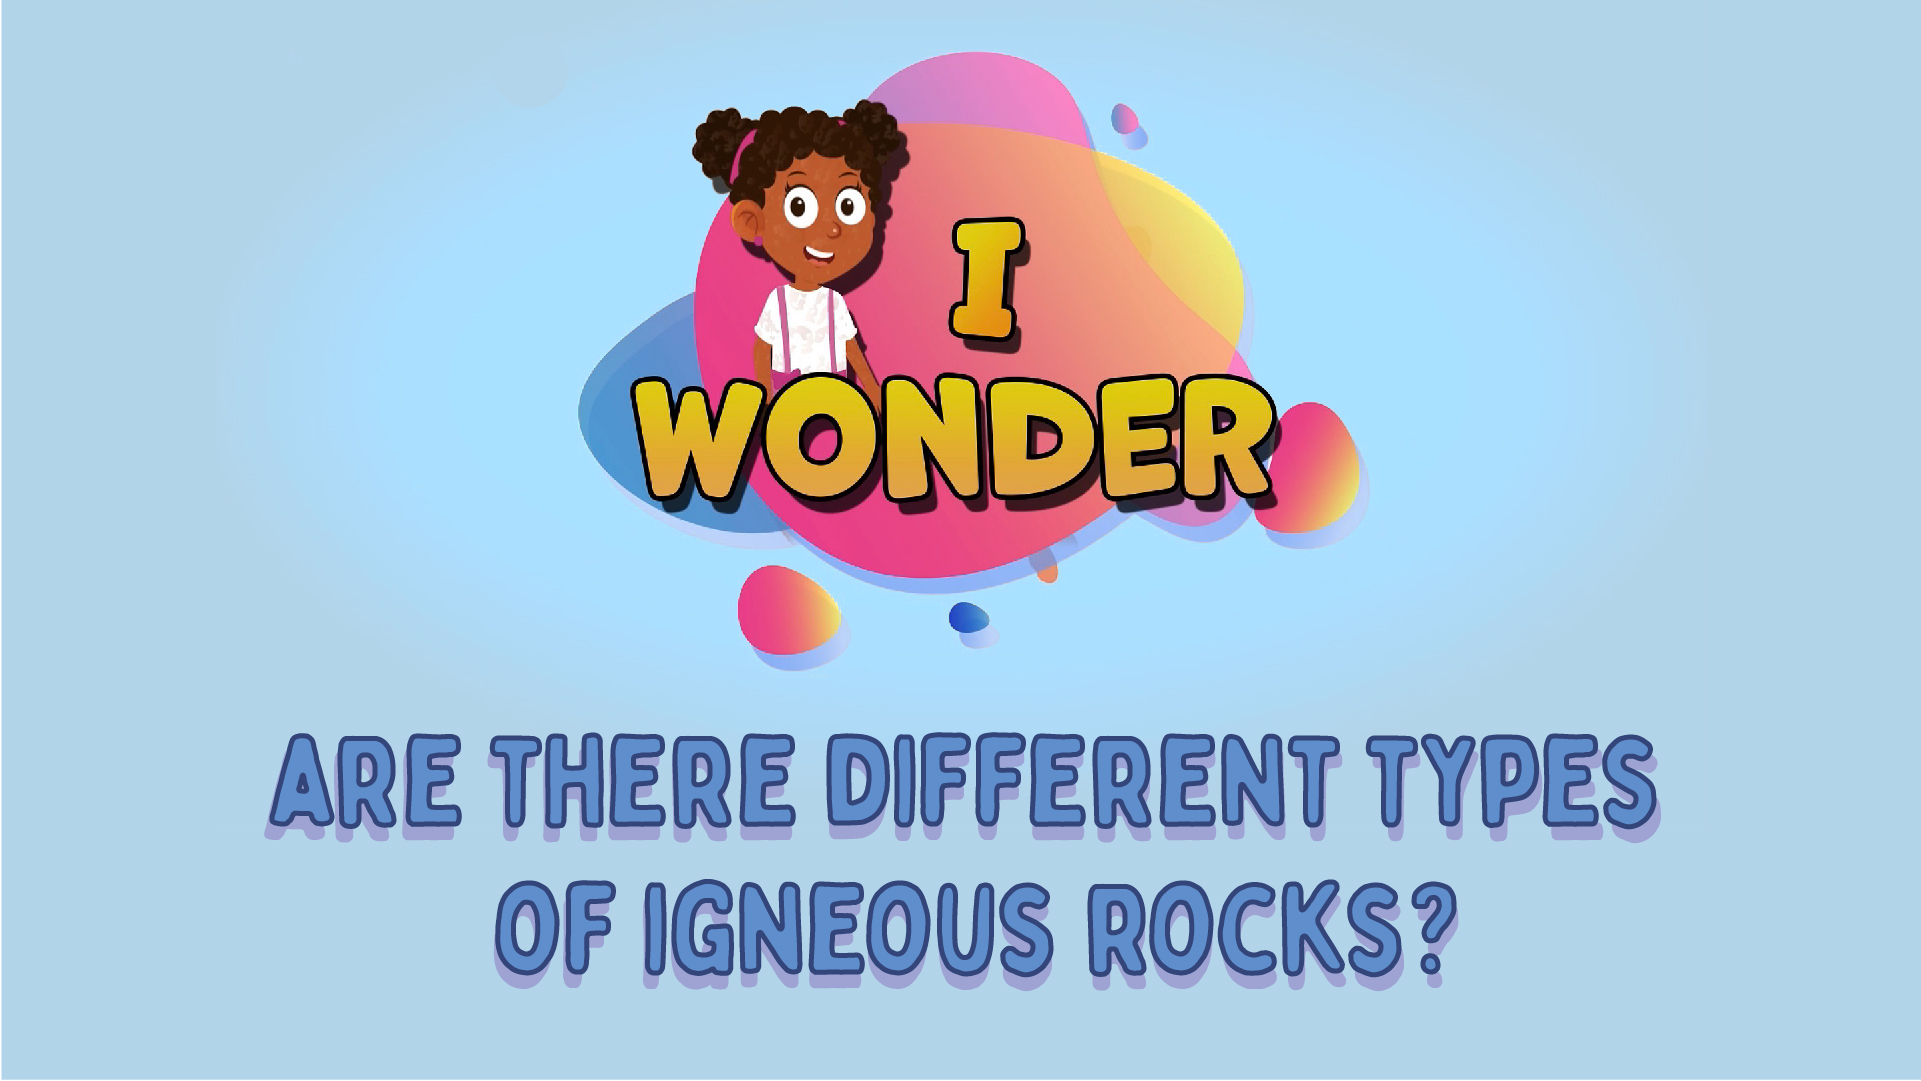 Are There Different Types Of Igneous Rocks?